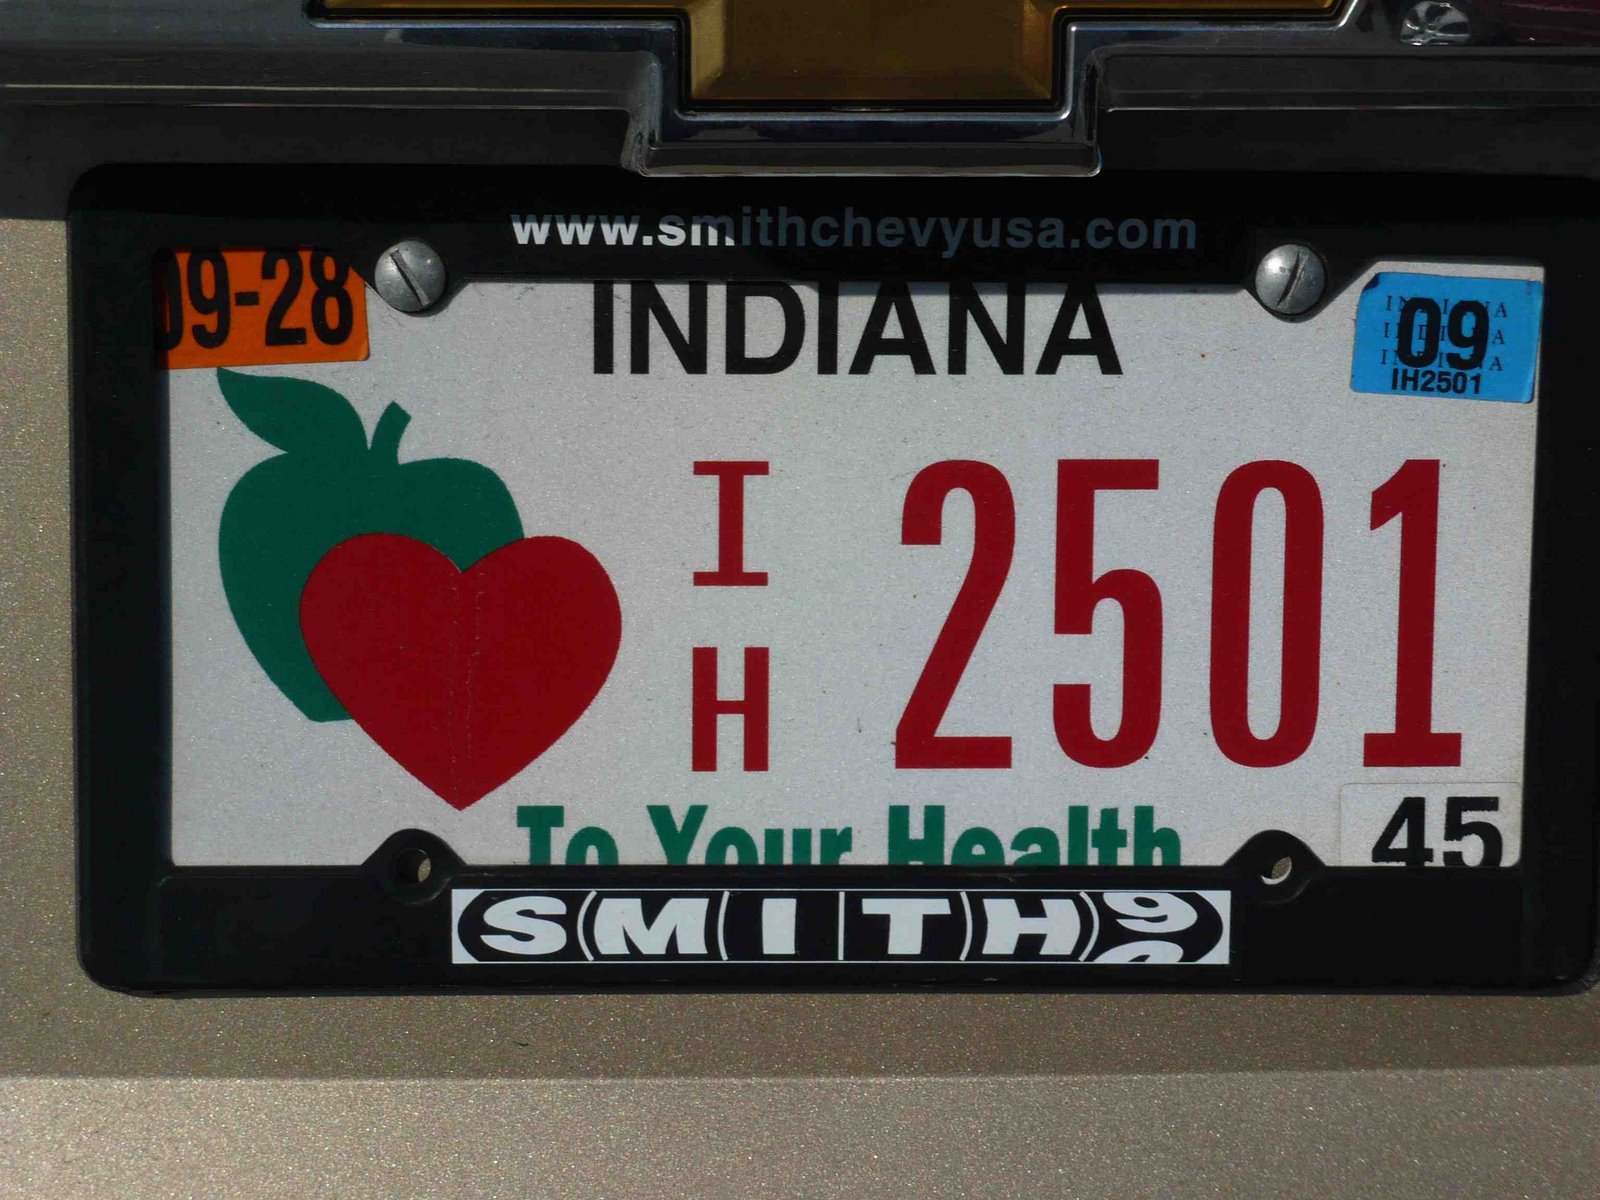 [Indiana+to+your+health.jpg]